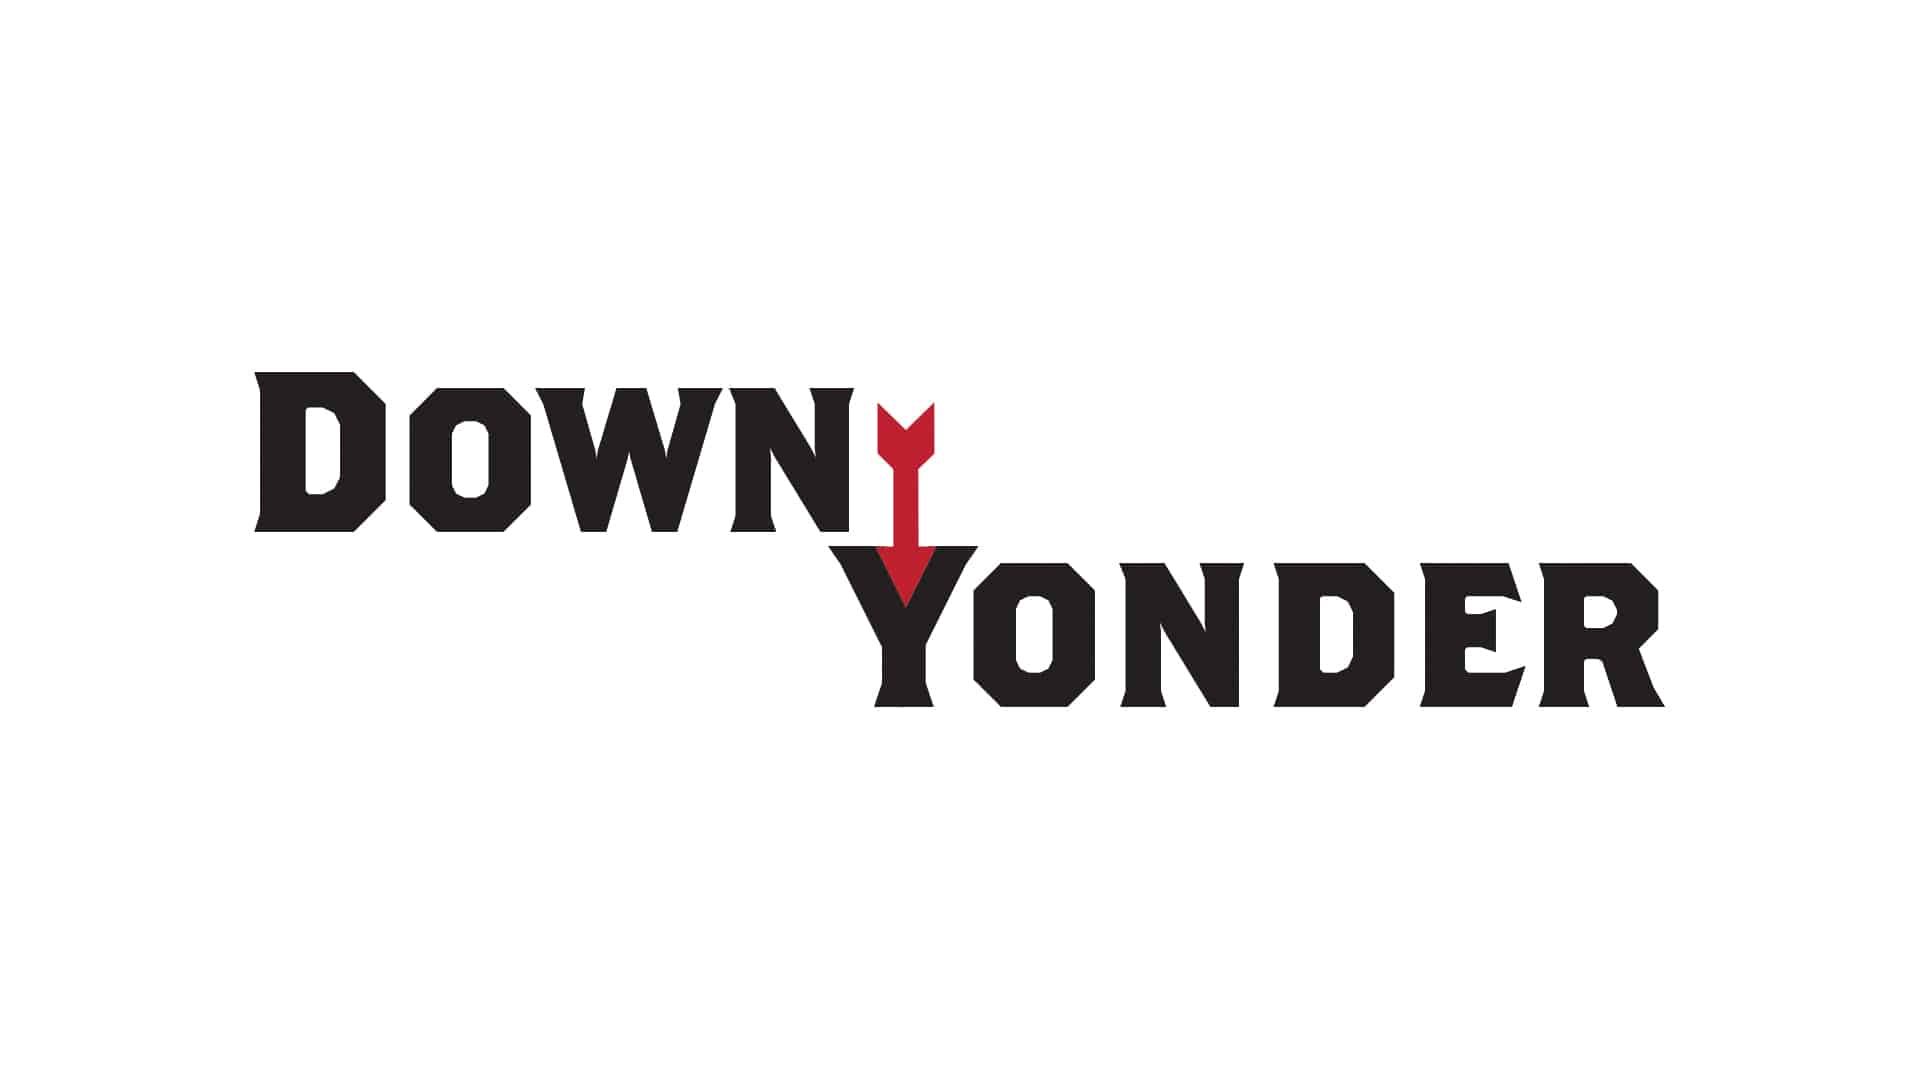 Down Yonder: Climate Change, Vote by Mail, Reopening Rural Economy, and More - Daily Yonder